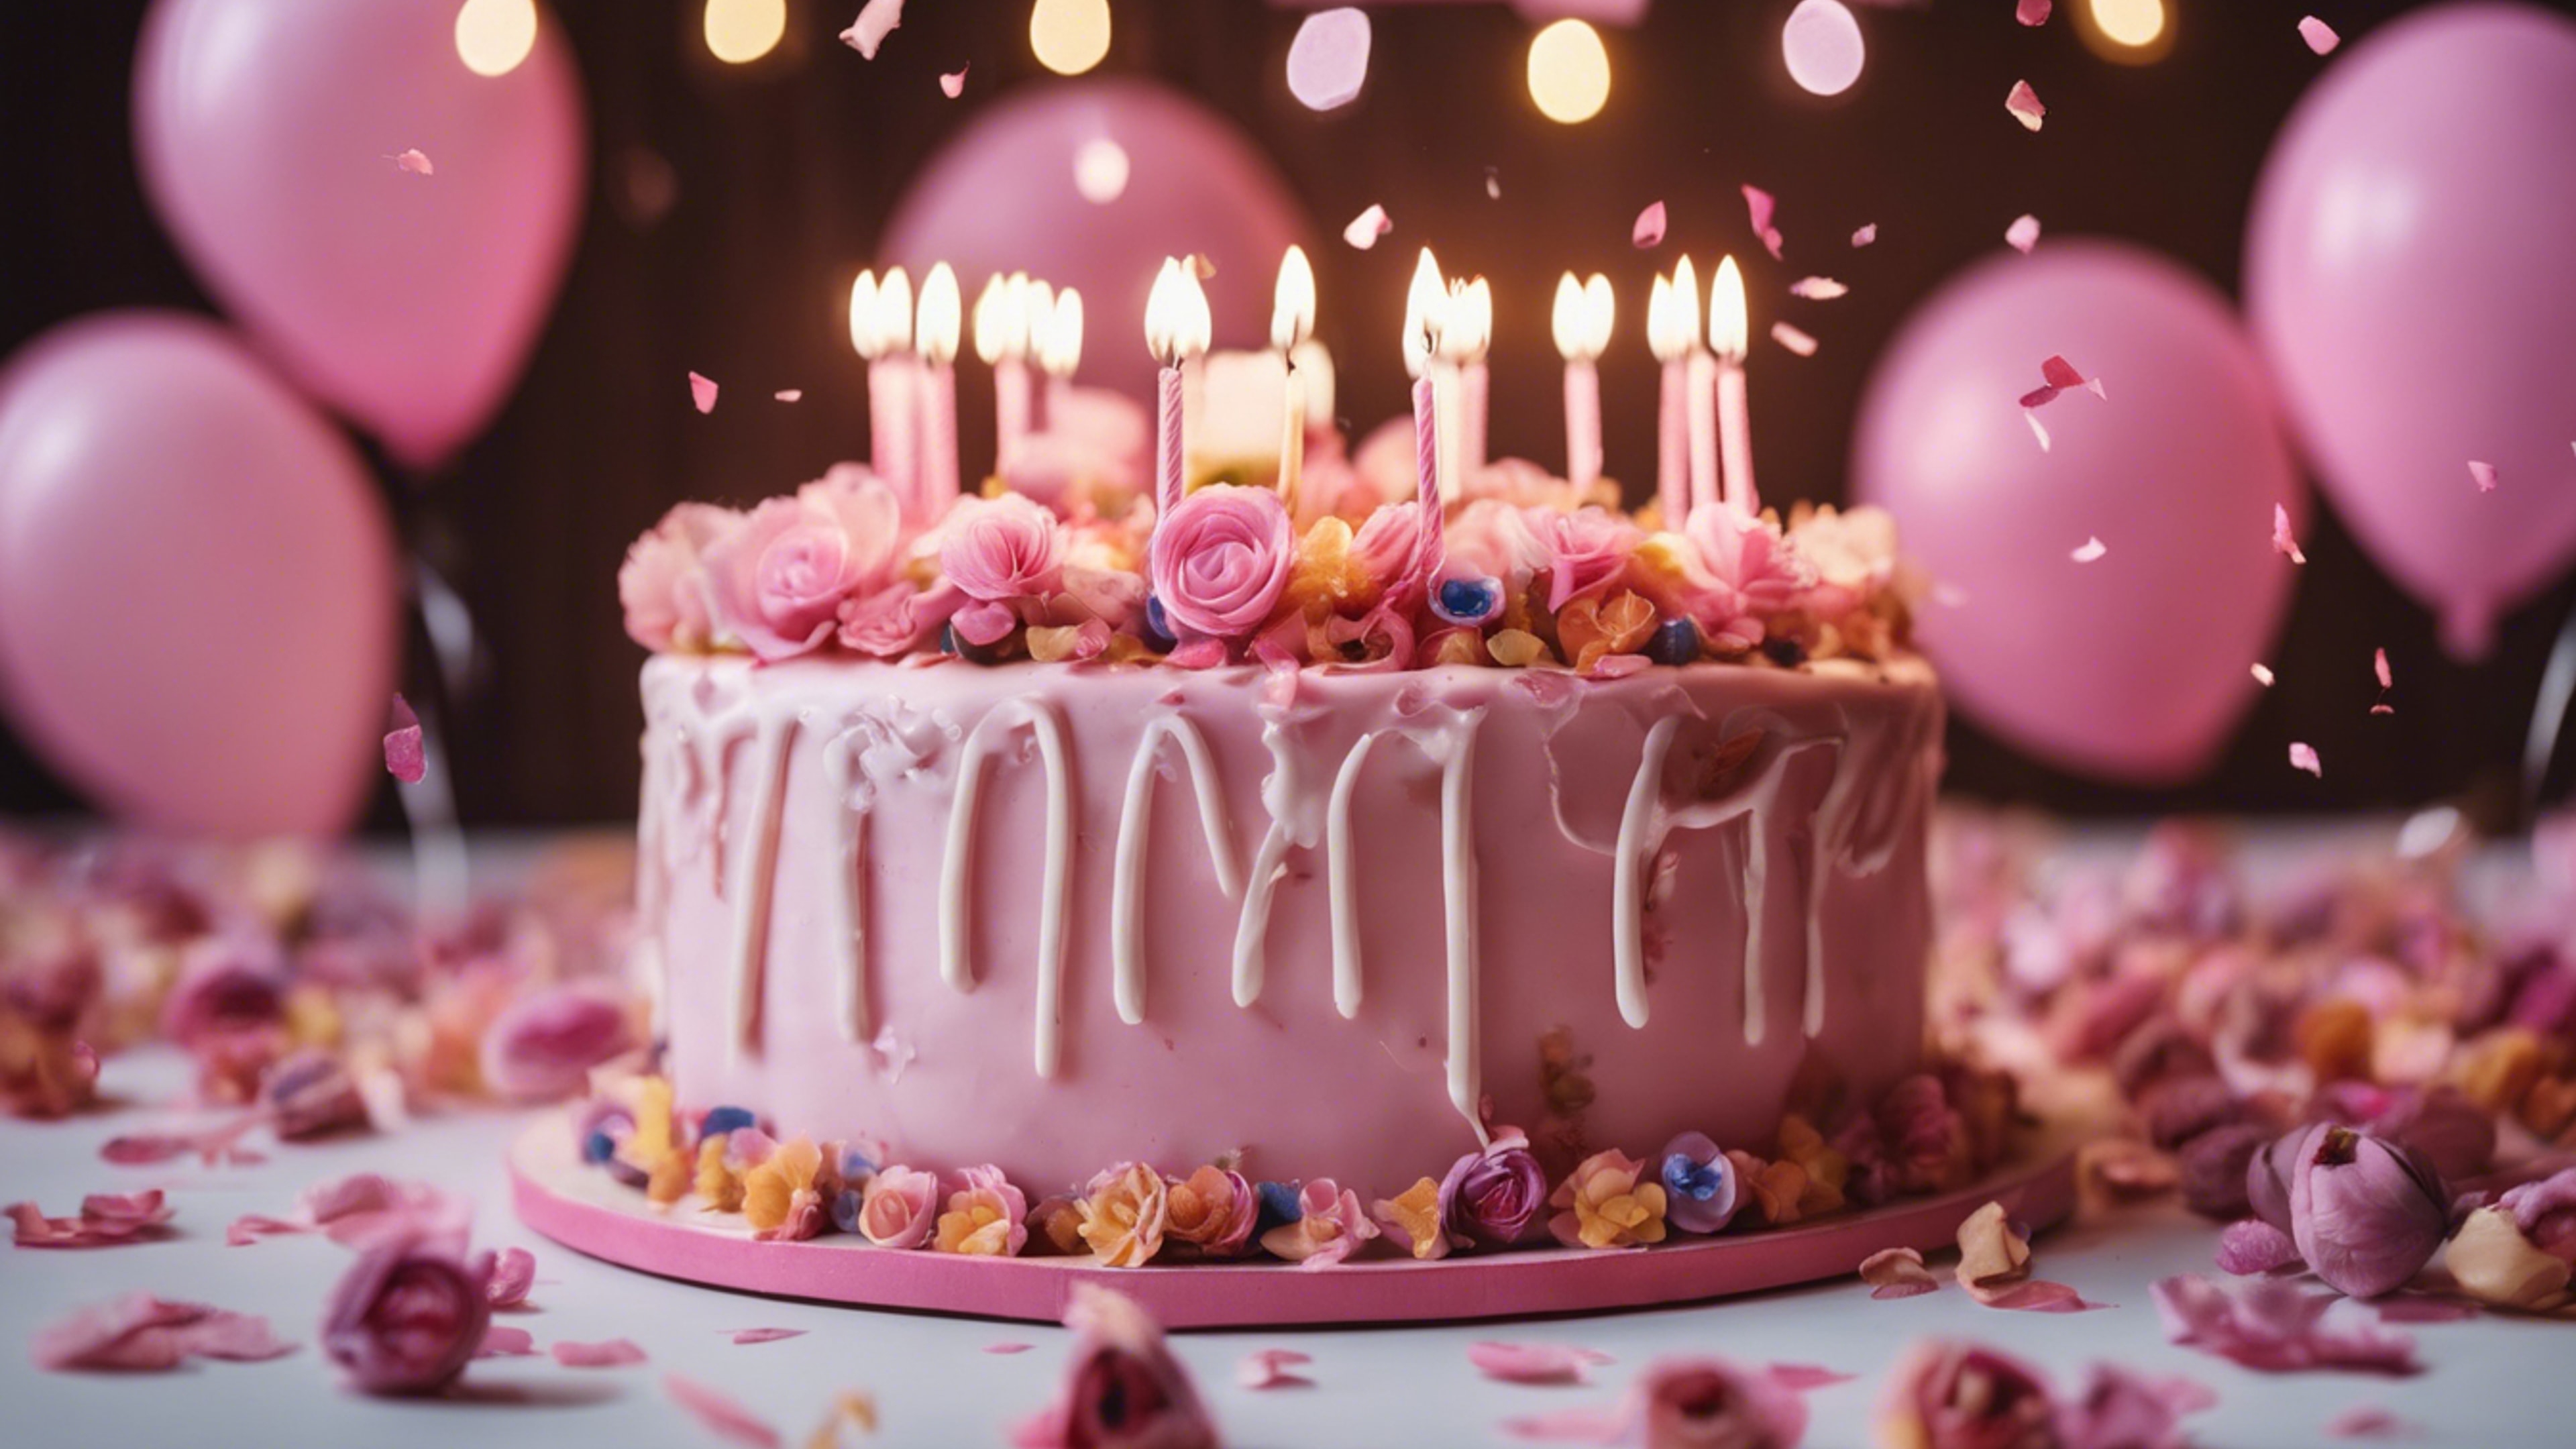 A girly birthday party with pink balloons, confetti, and a big cake decorated with edible flowers. Taustakuva[43e1da28e36740768483]